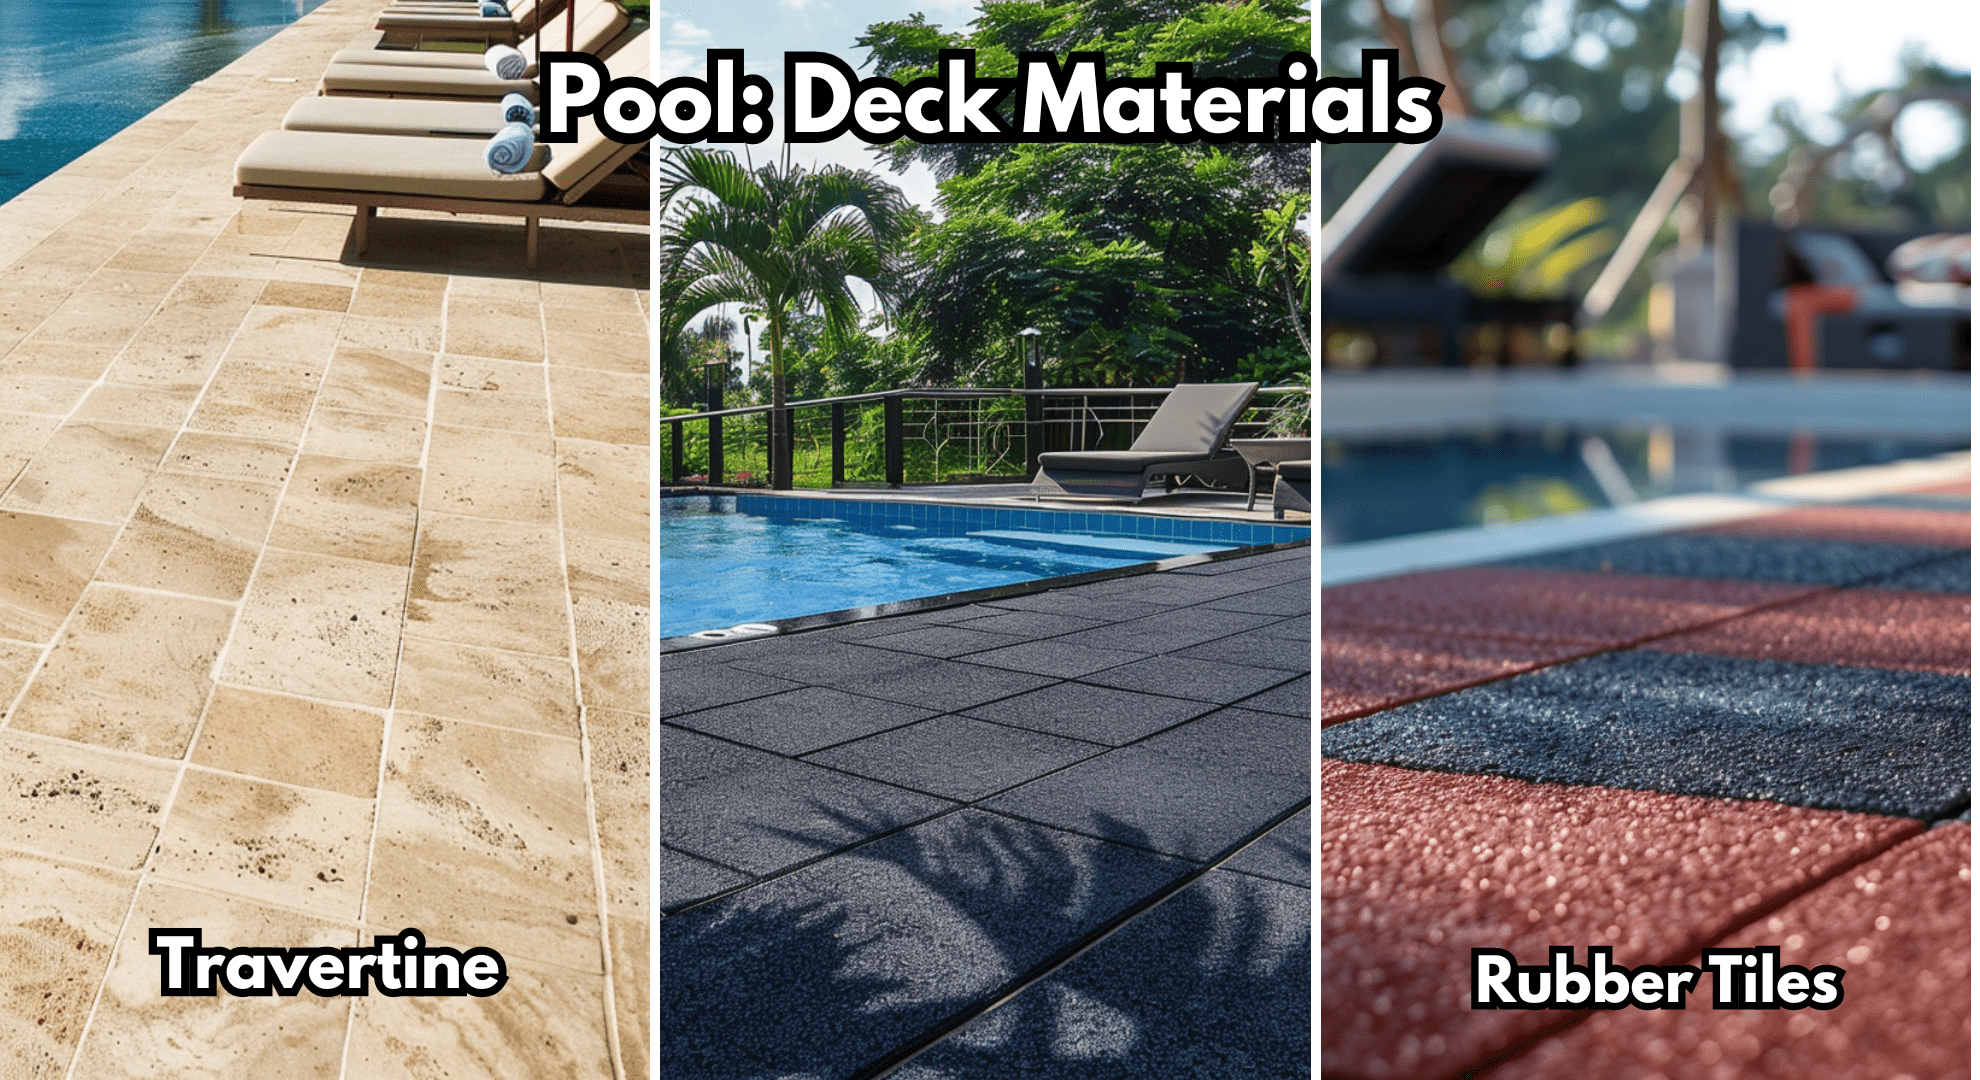 Travertine and rubber titles deck materials pool